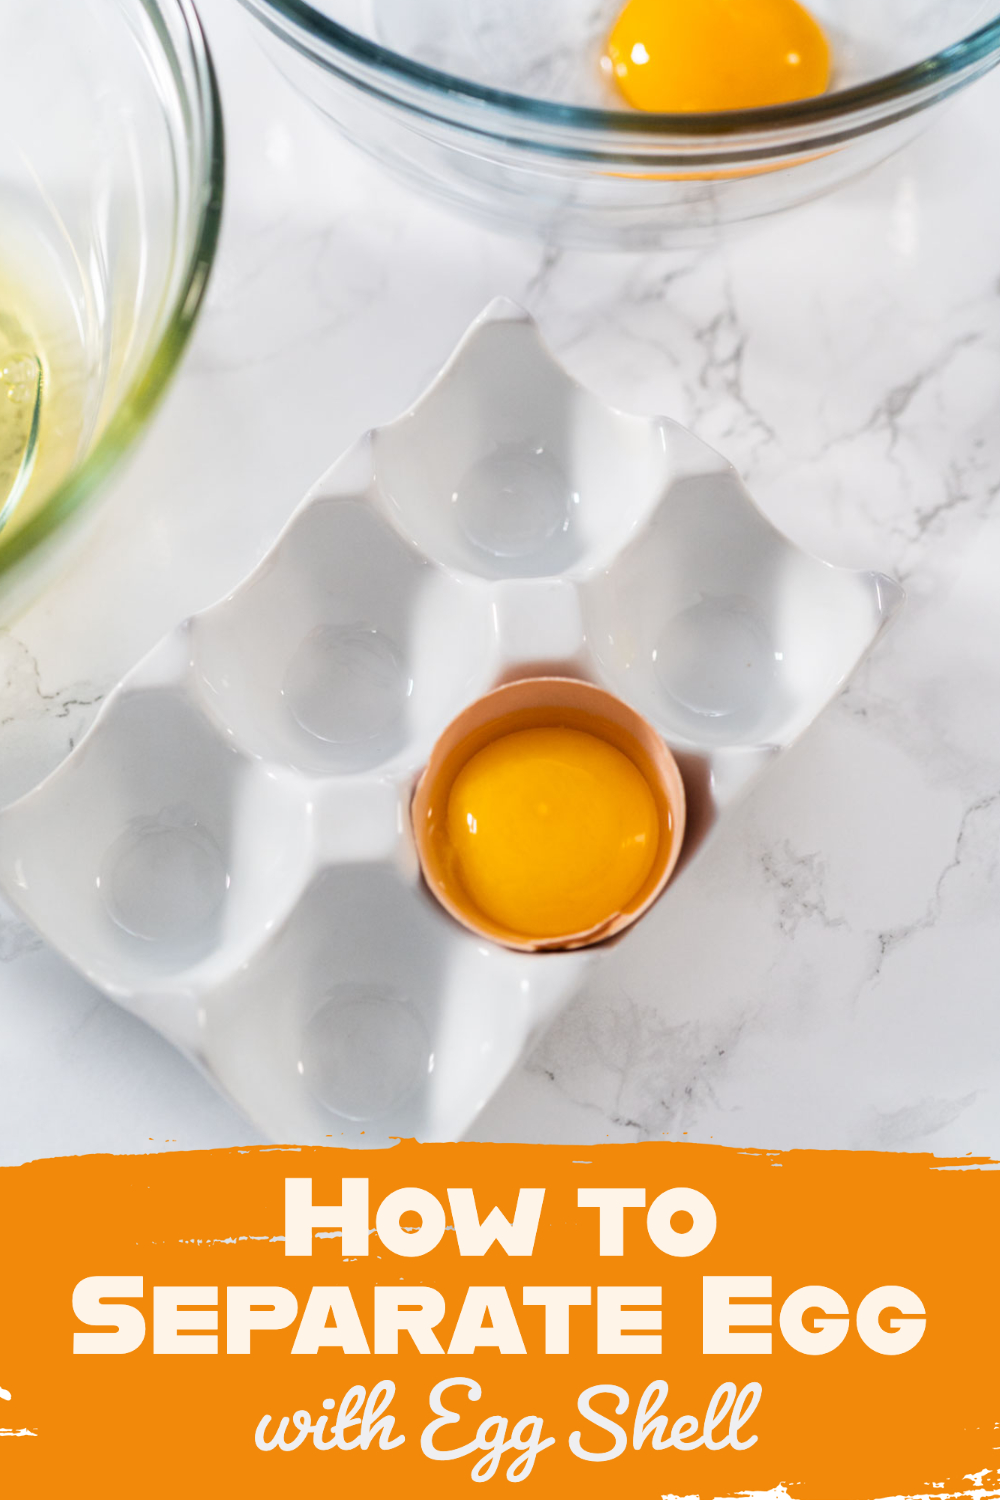 How to Separate Egg with Egg Shell